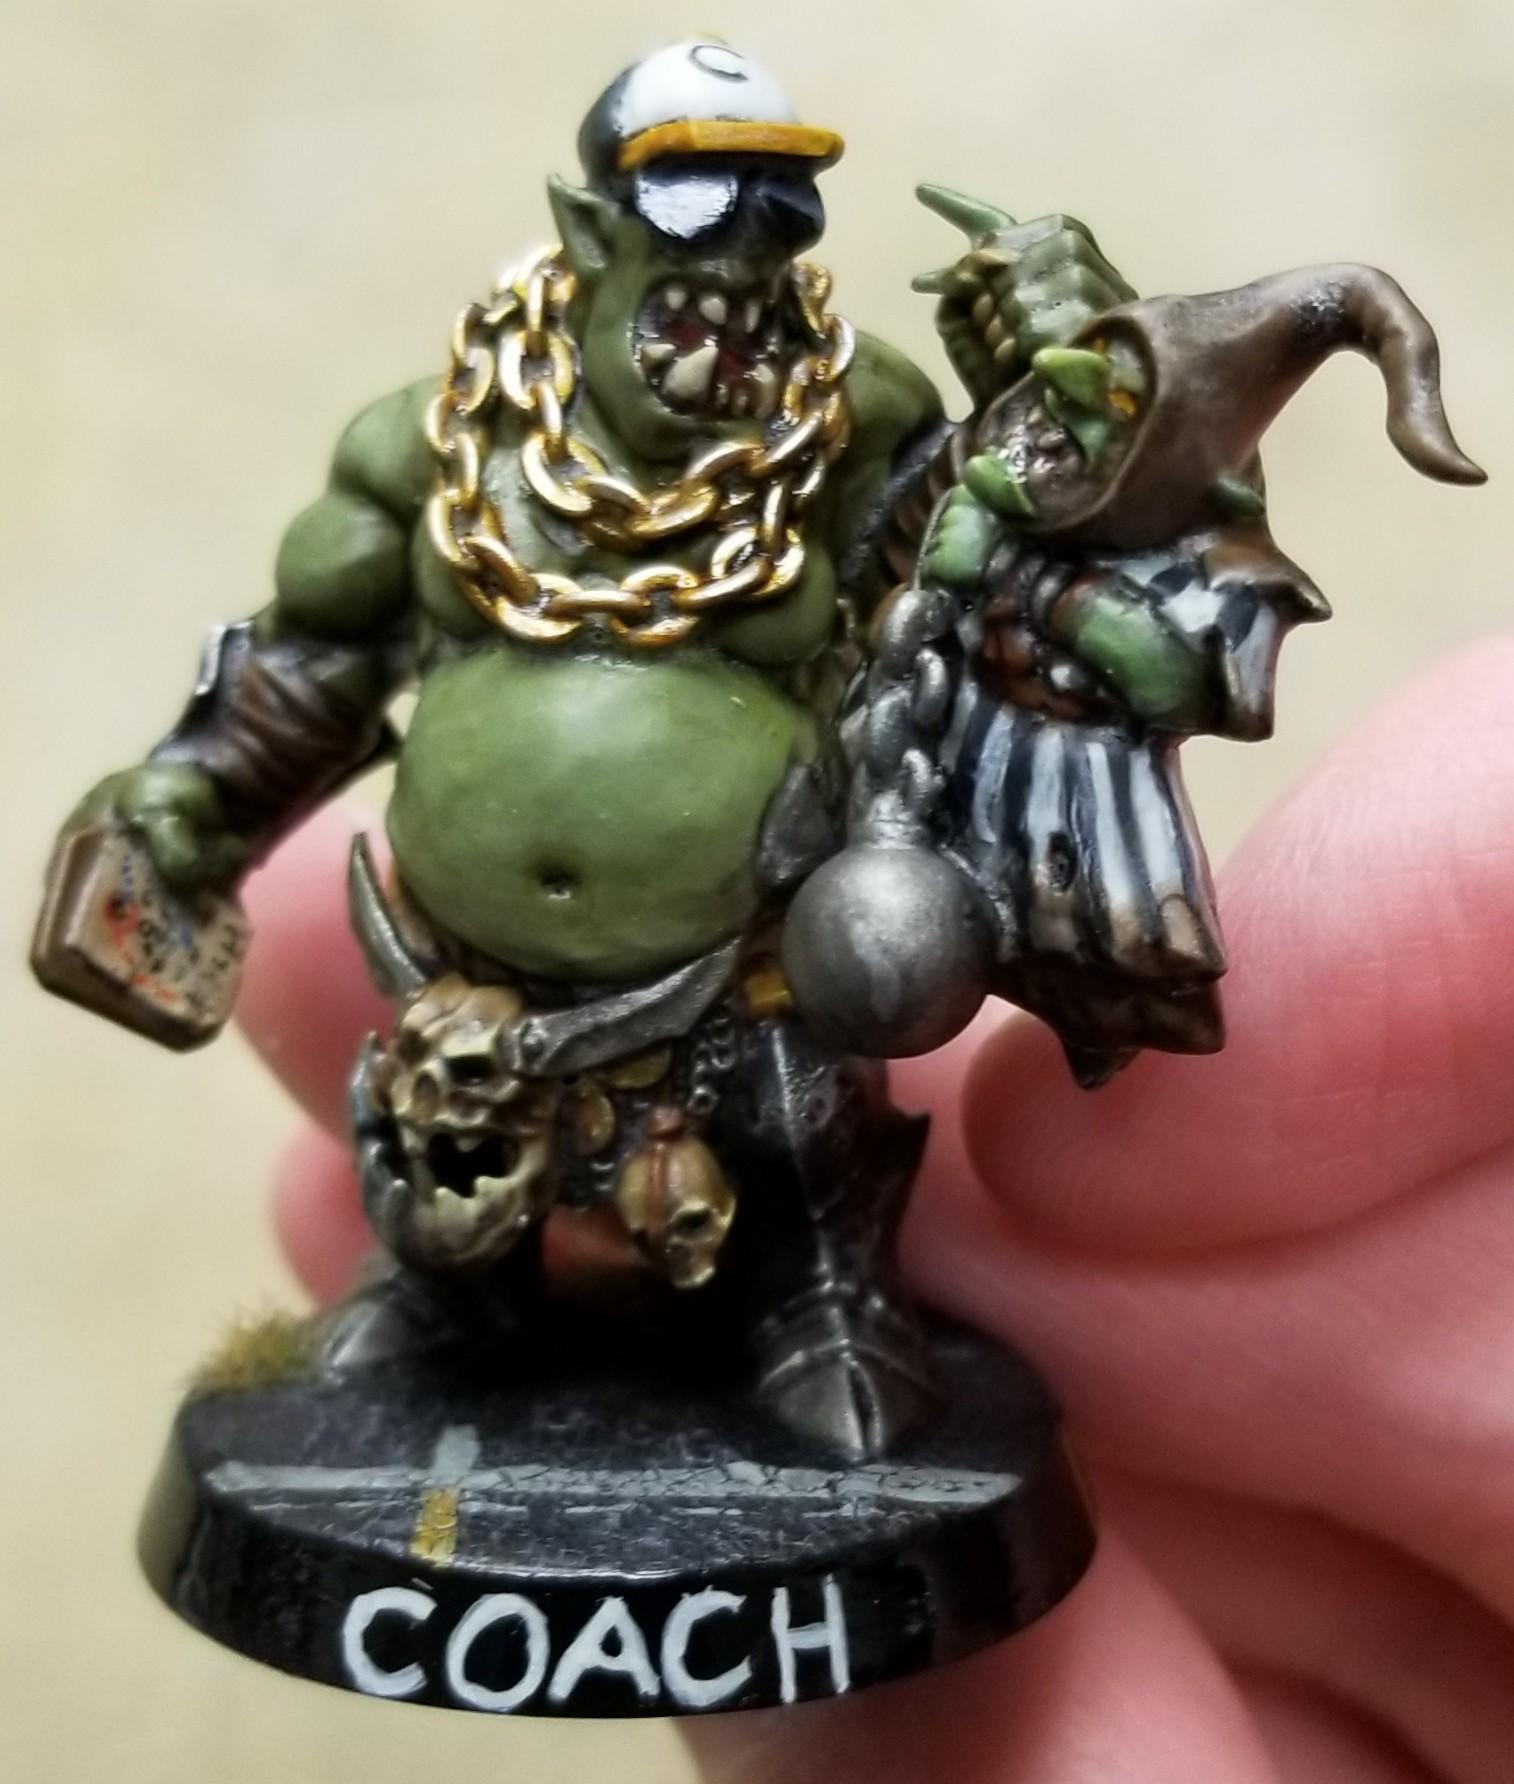 Blood Bowl, Coach, Conversion, Go Steelers, Goblins, Gouged Eyes, Kitbash, Orcs, Orks, Pittsburgh, Referee